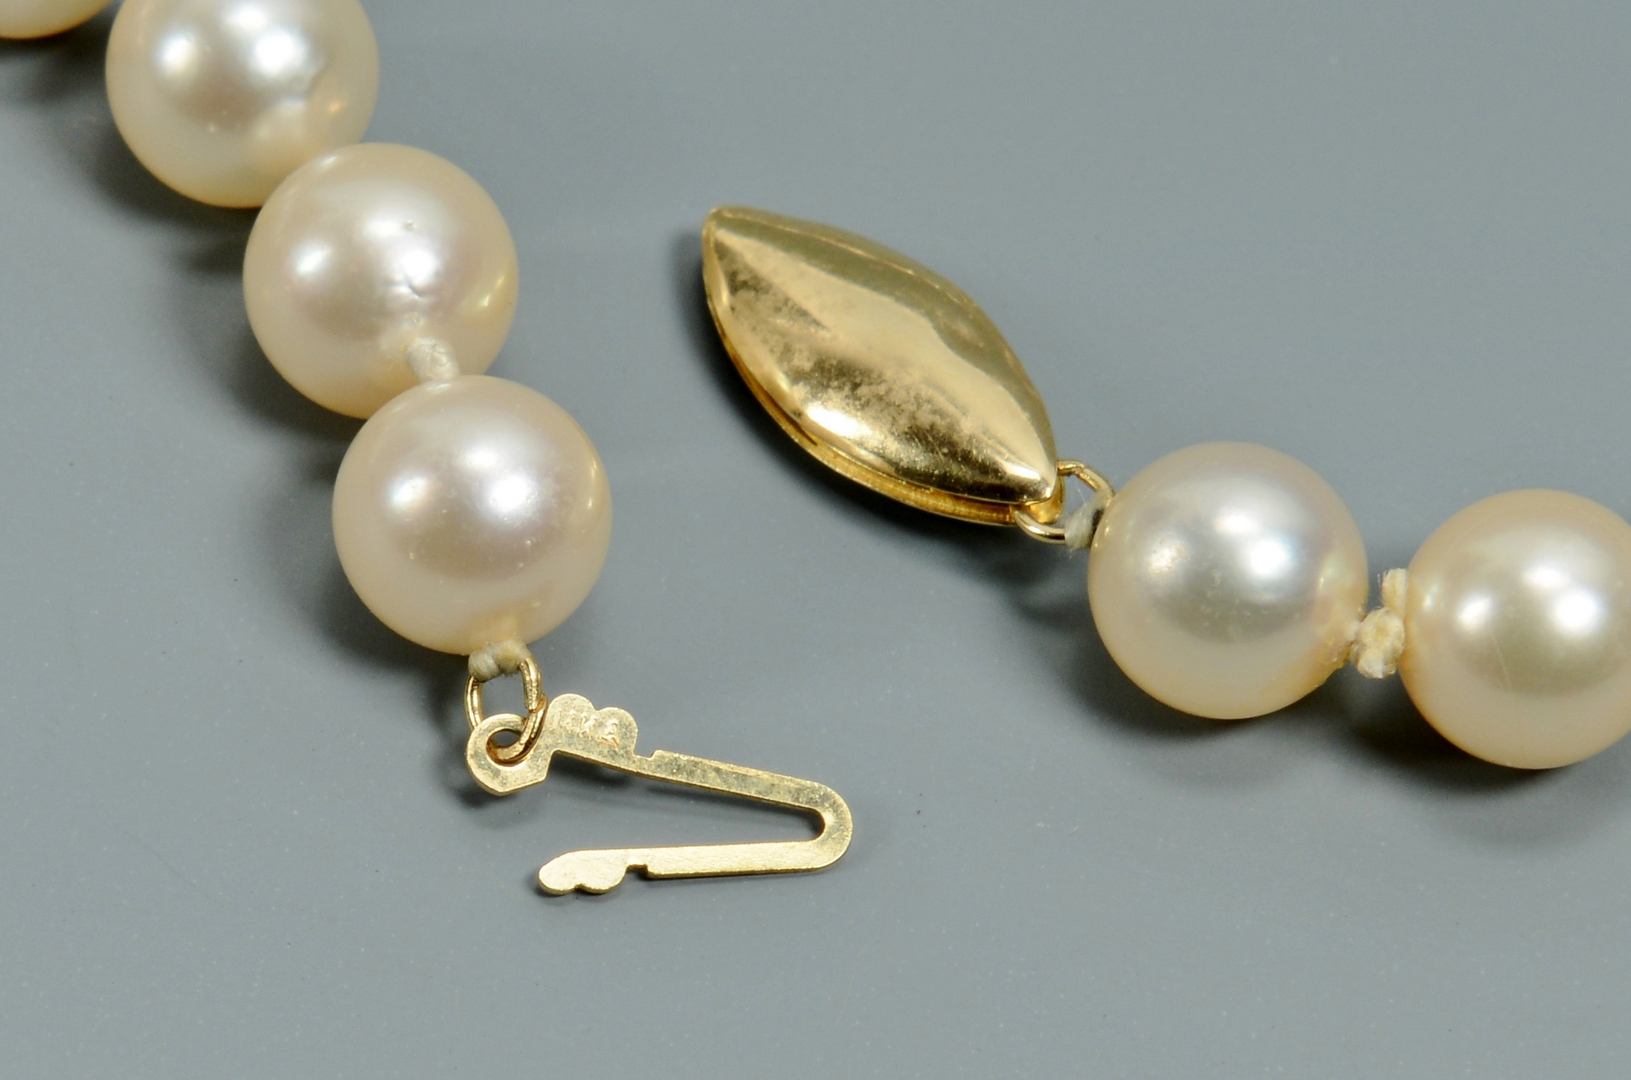 Lot 3088213: Long 8mm Cultured Pearl Necklace, 38"